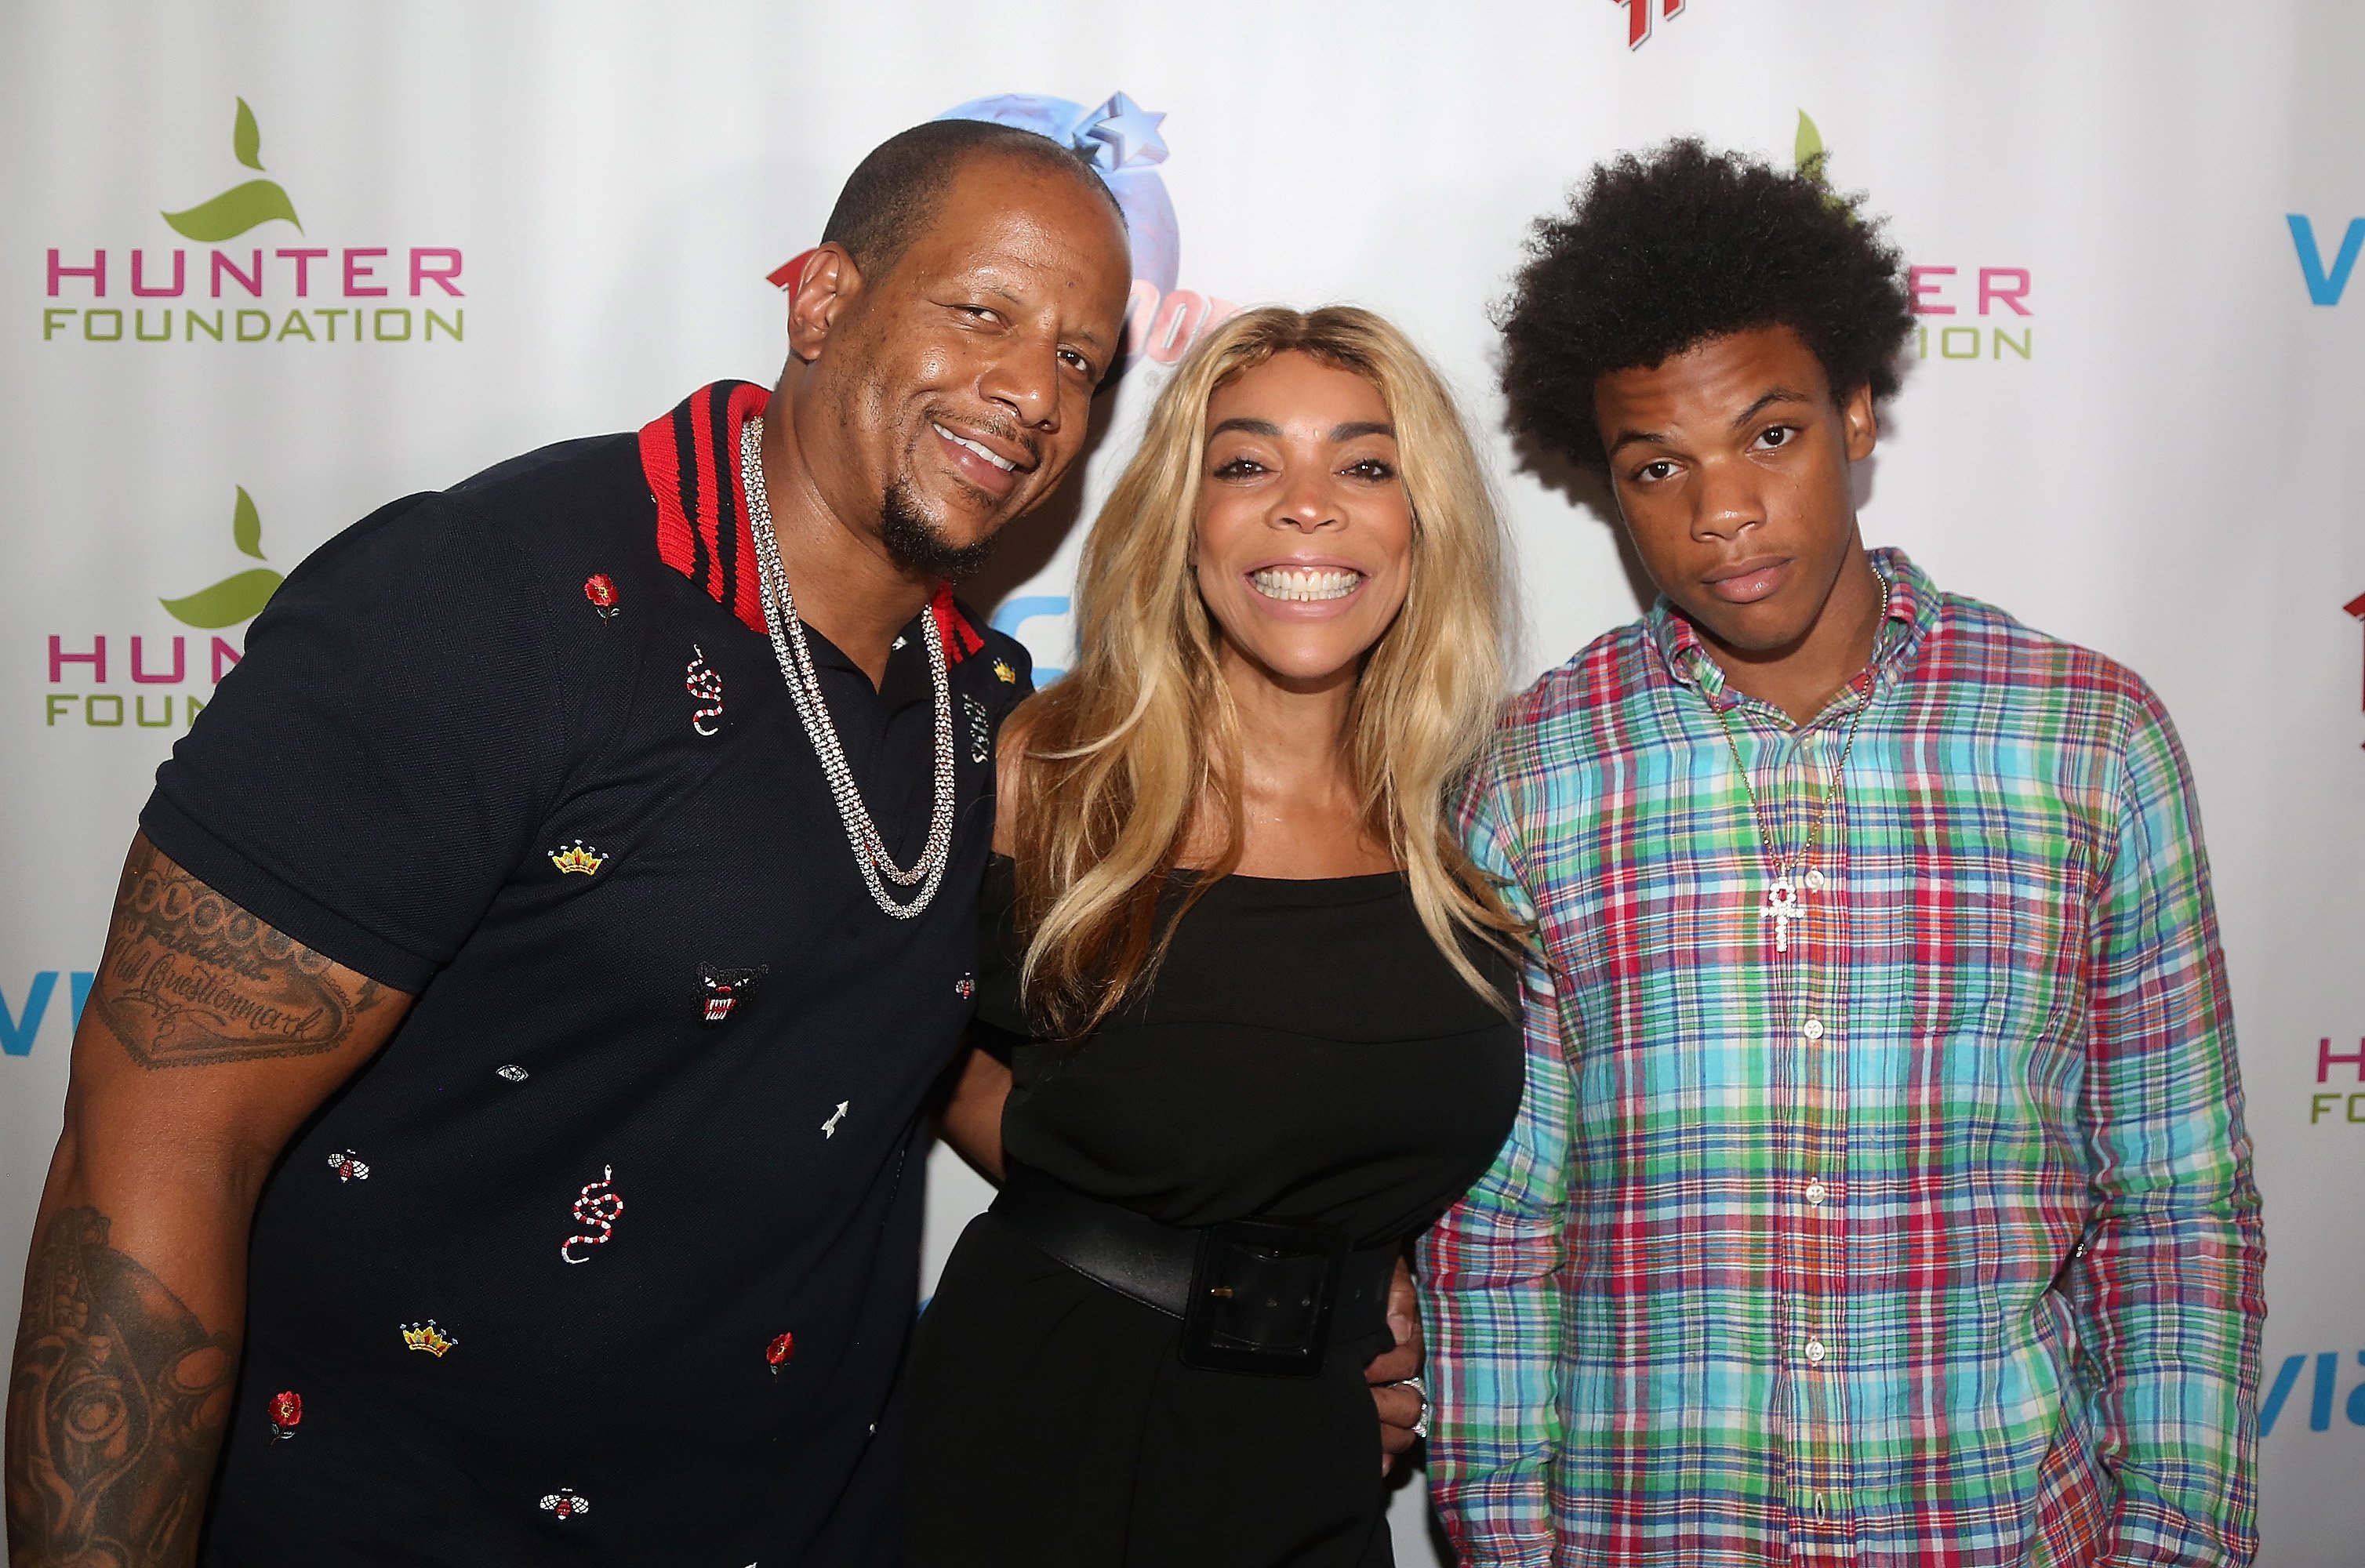 Kevin Hunter, Wendy Williams & Kevin Hunter Jr. in New York City on July 11, 2017 | Photo: Getty Images